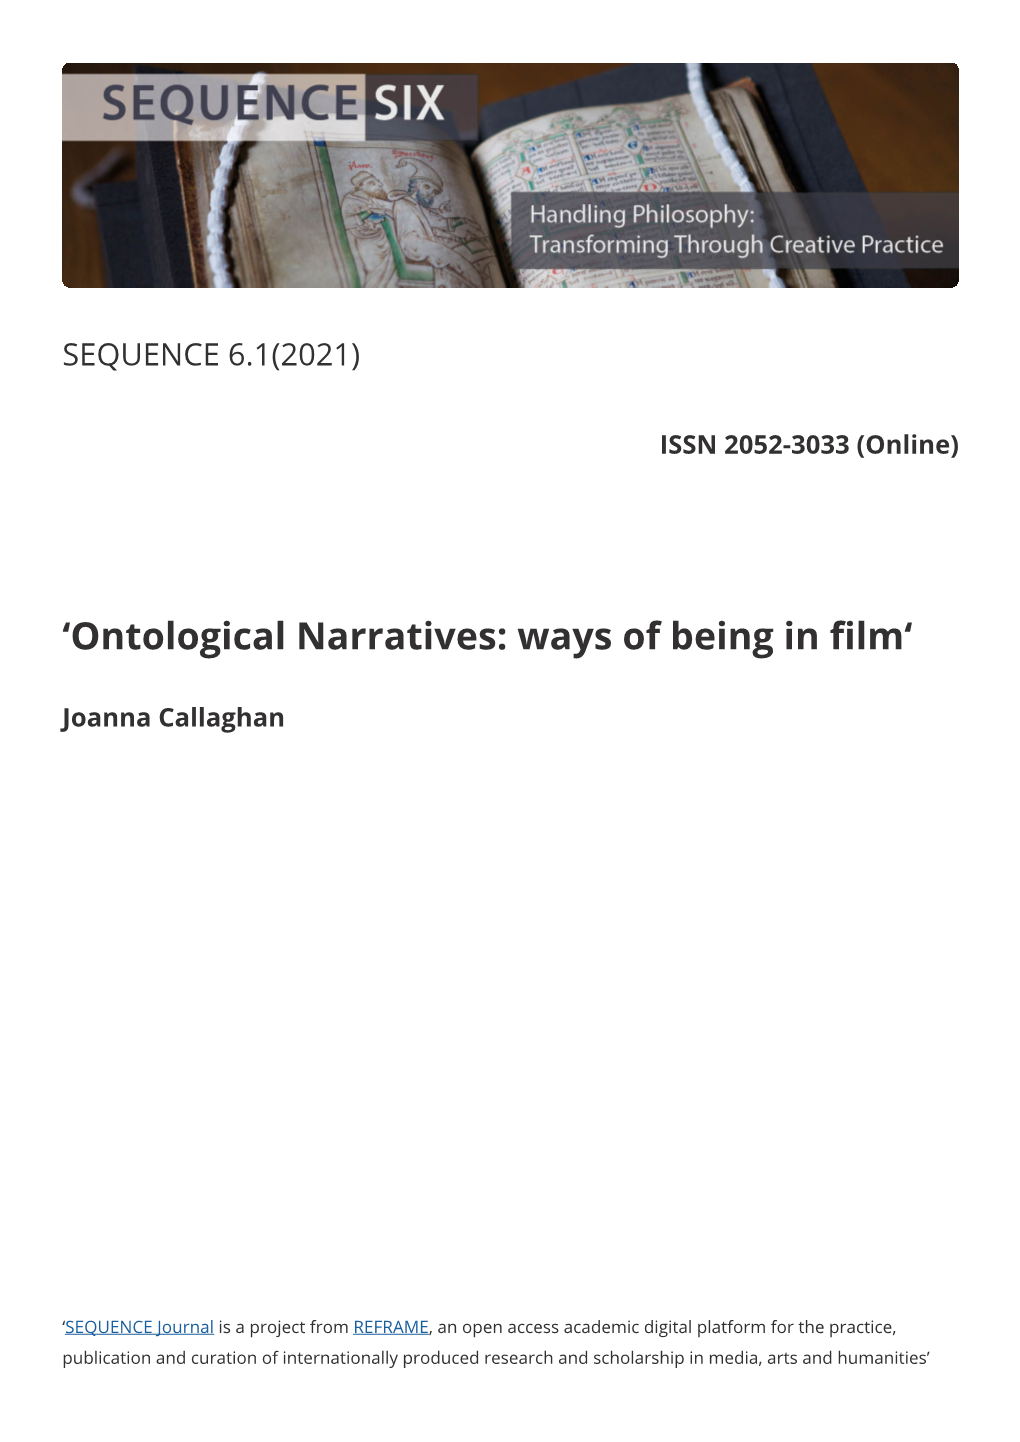 'Ontological Narratives: Ways of Being in Film'